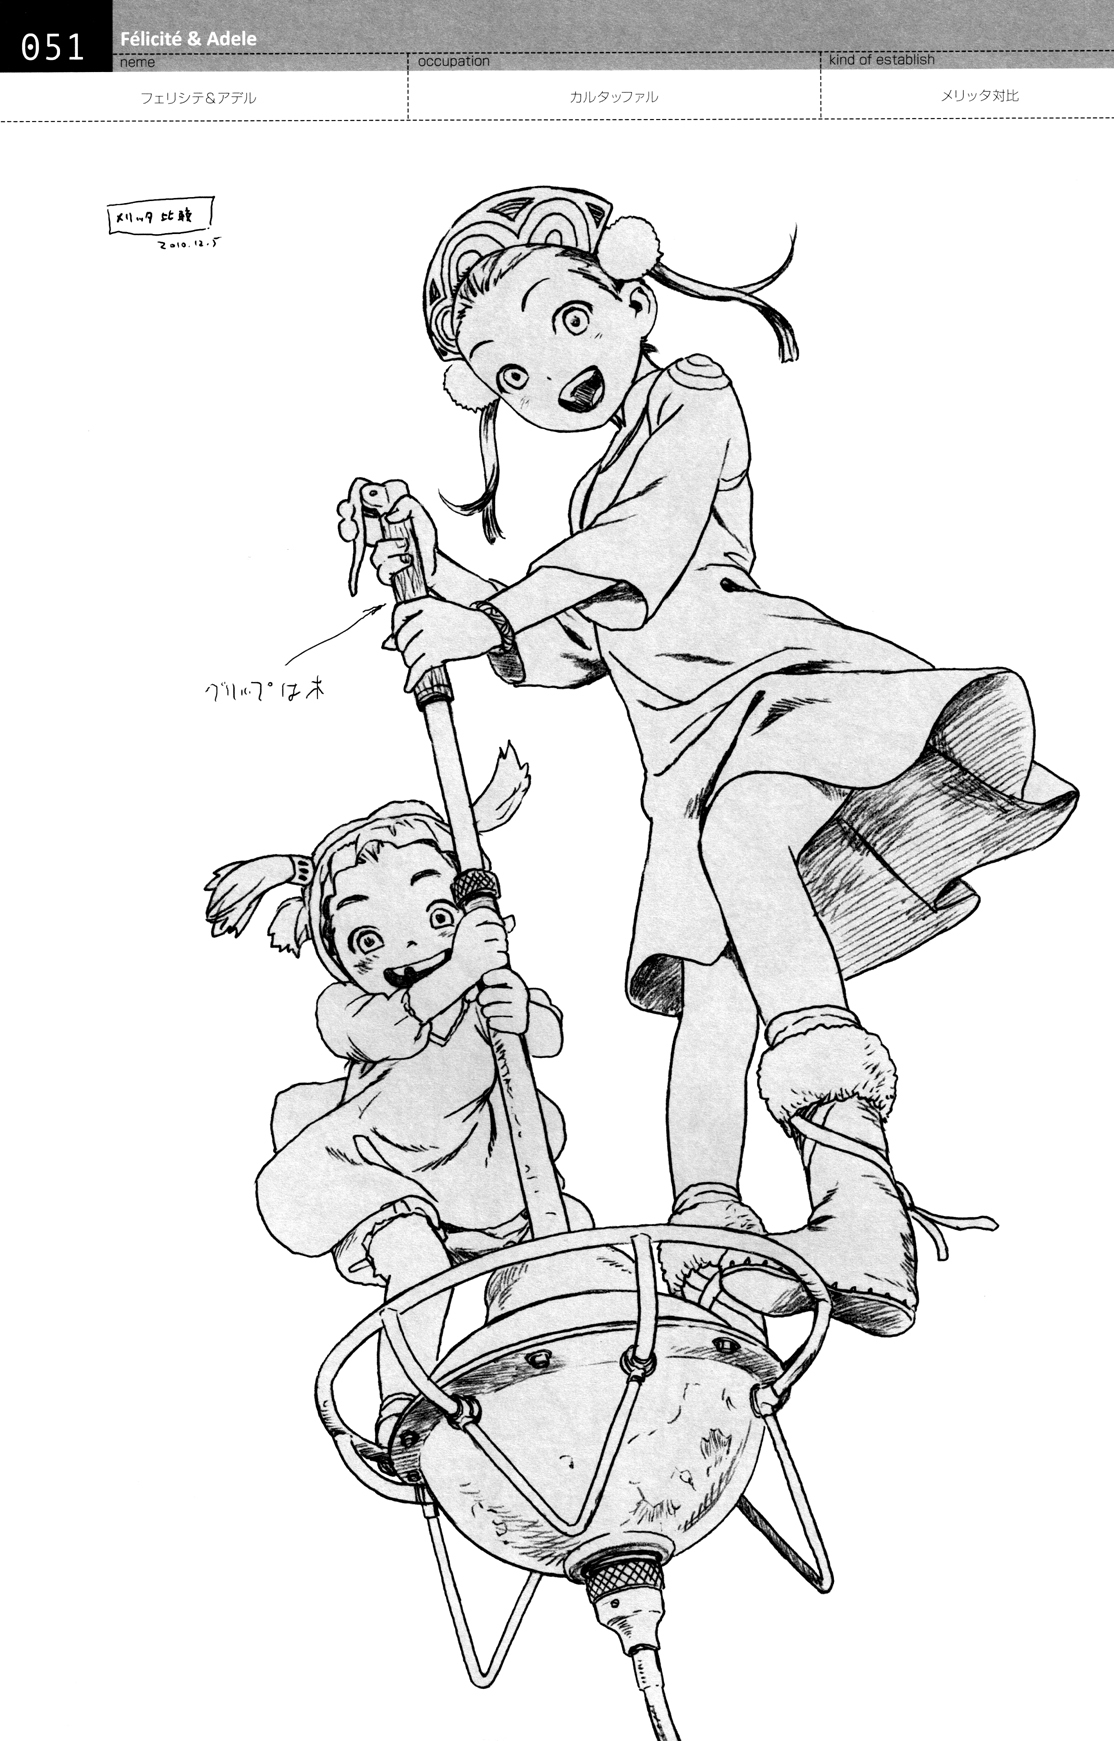 [Pasta's Estab (Range Murata)] Linkage - Last Exile ~ Fam, The Silver Wing - Character Filegraphy 02 48